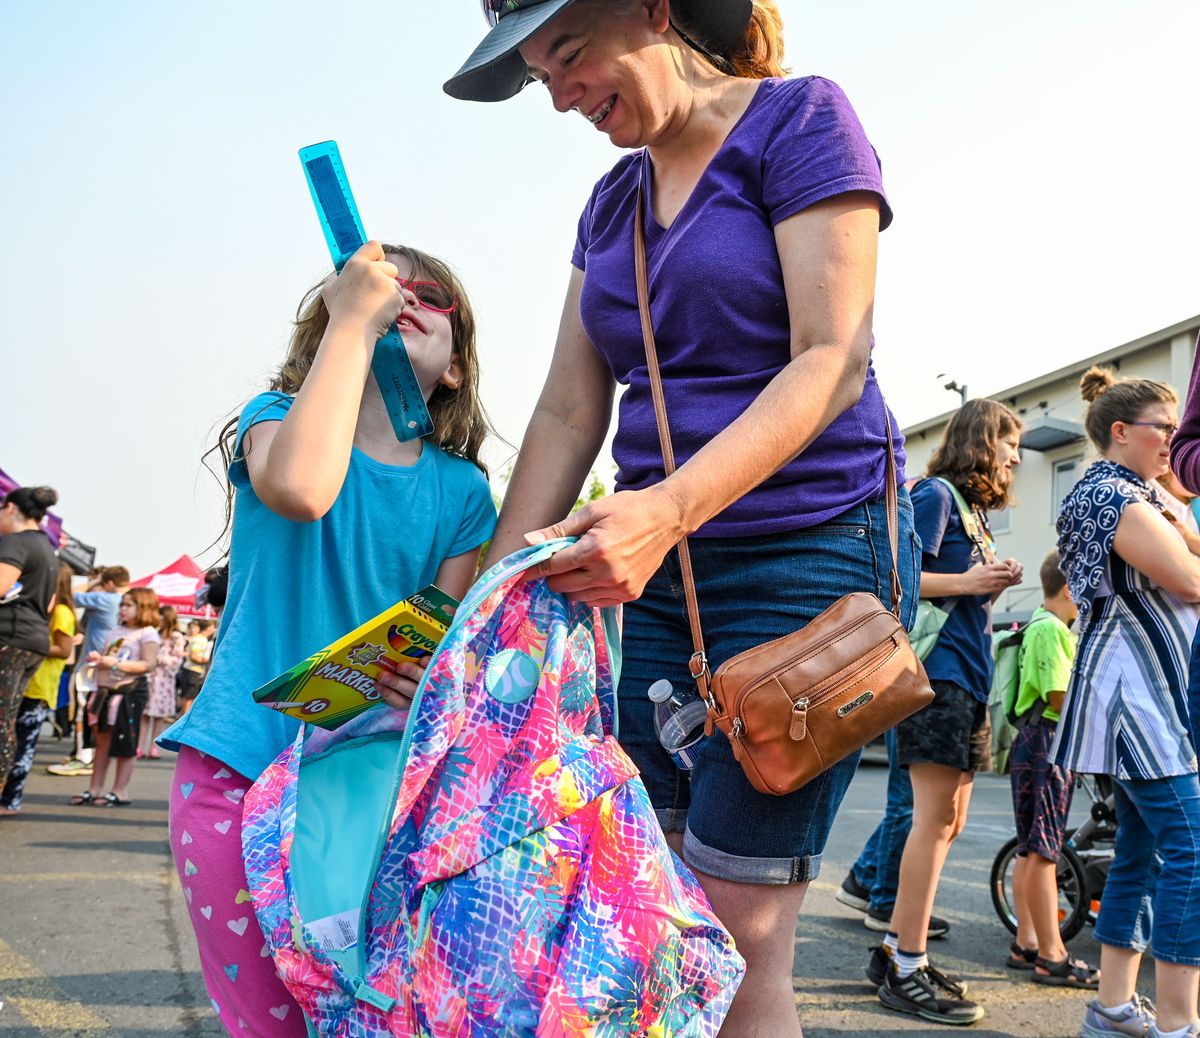 Victoria Weaver reveals the school supplies contents to her mother, Betsy, after finding a finding a backpack to match her outfit during the 14th Annual Backpack for Kids event at The Salvation Army on Wednesday in Spokane.  (DAN PELLE/THE SPOKESMAN-REVIEW)